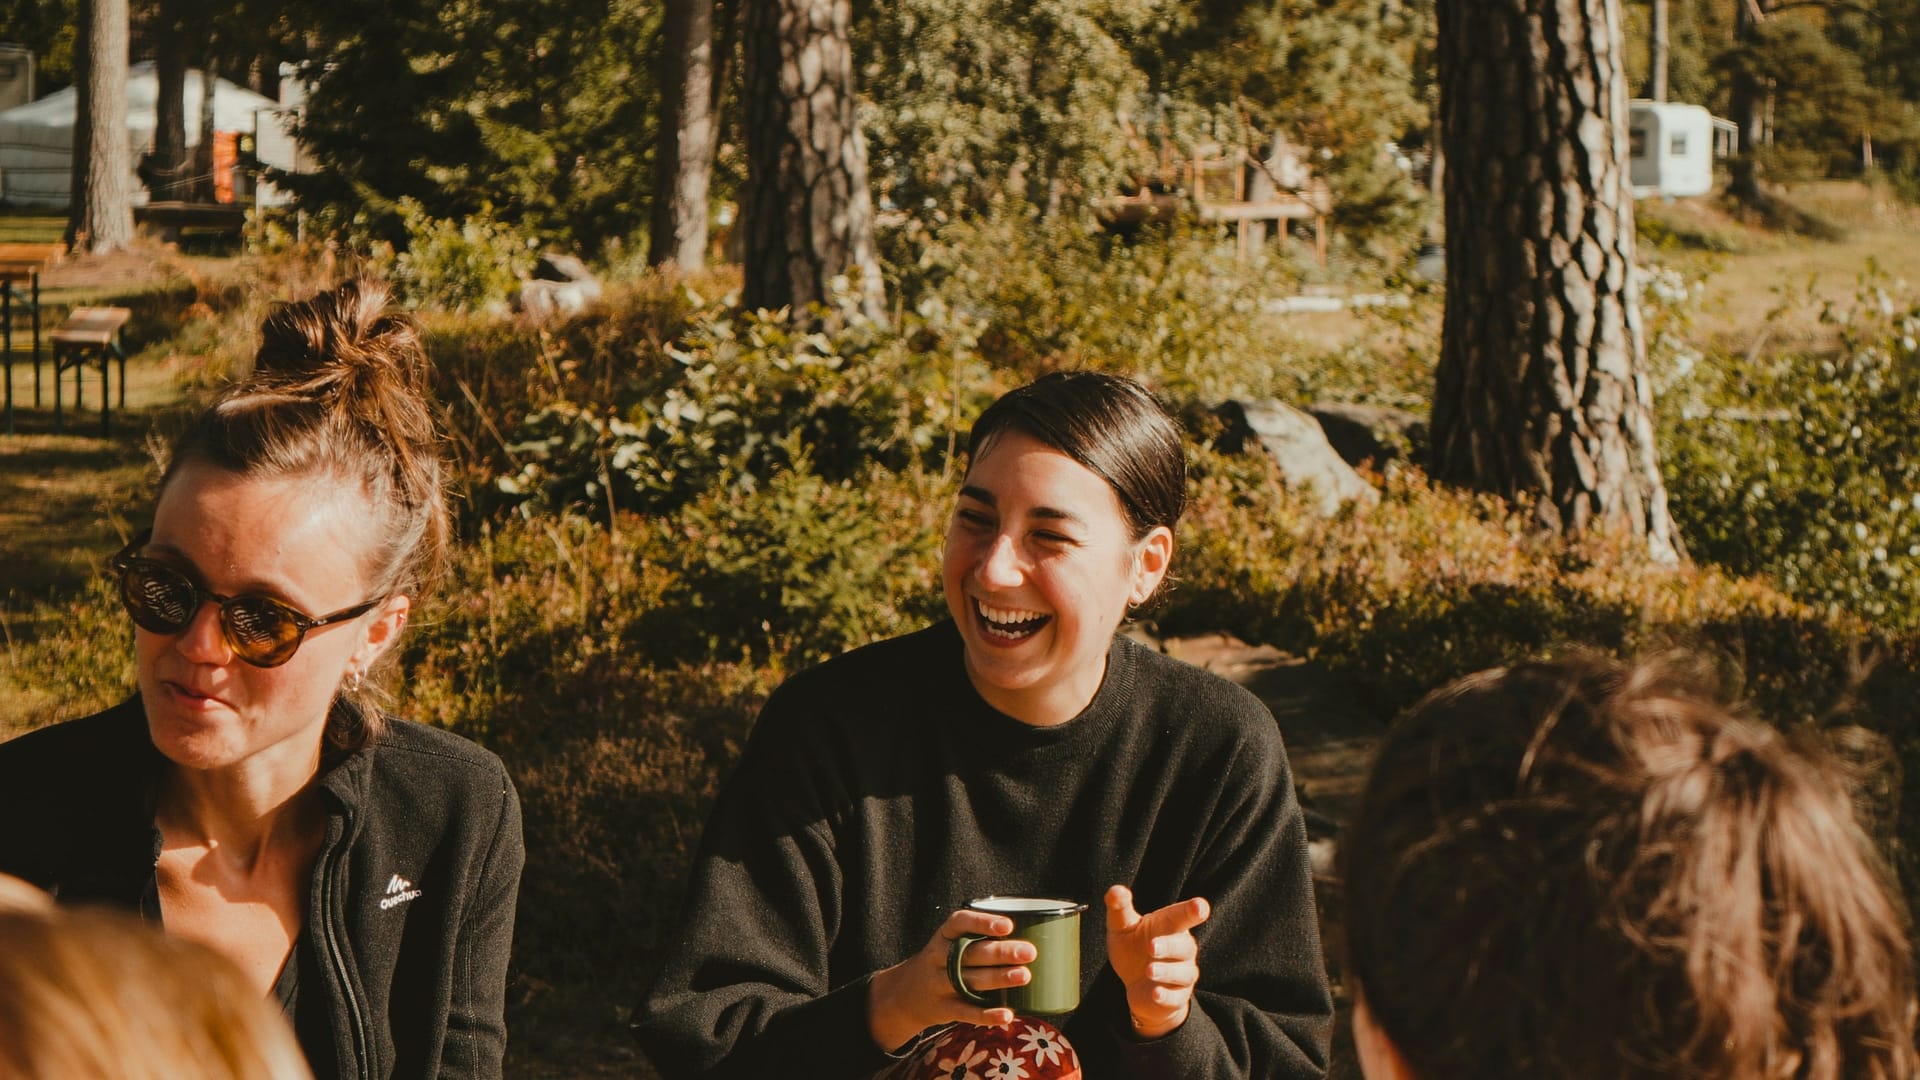 Campers at their site enjoying some outdoor hospitality on a sunny day, drinking coffee in camping mugs, smiling, and laughing with trees in the background. Photo by Tam Koppelaar.